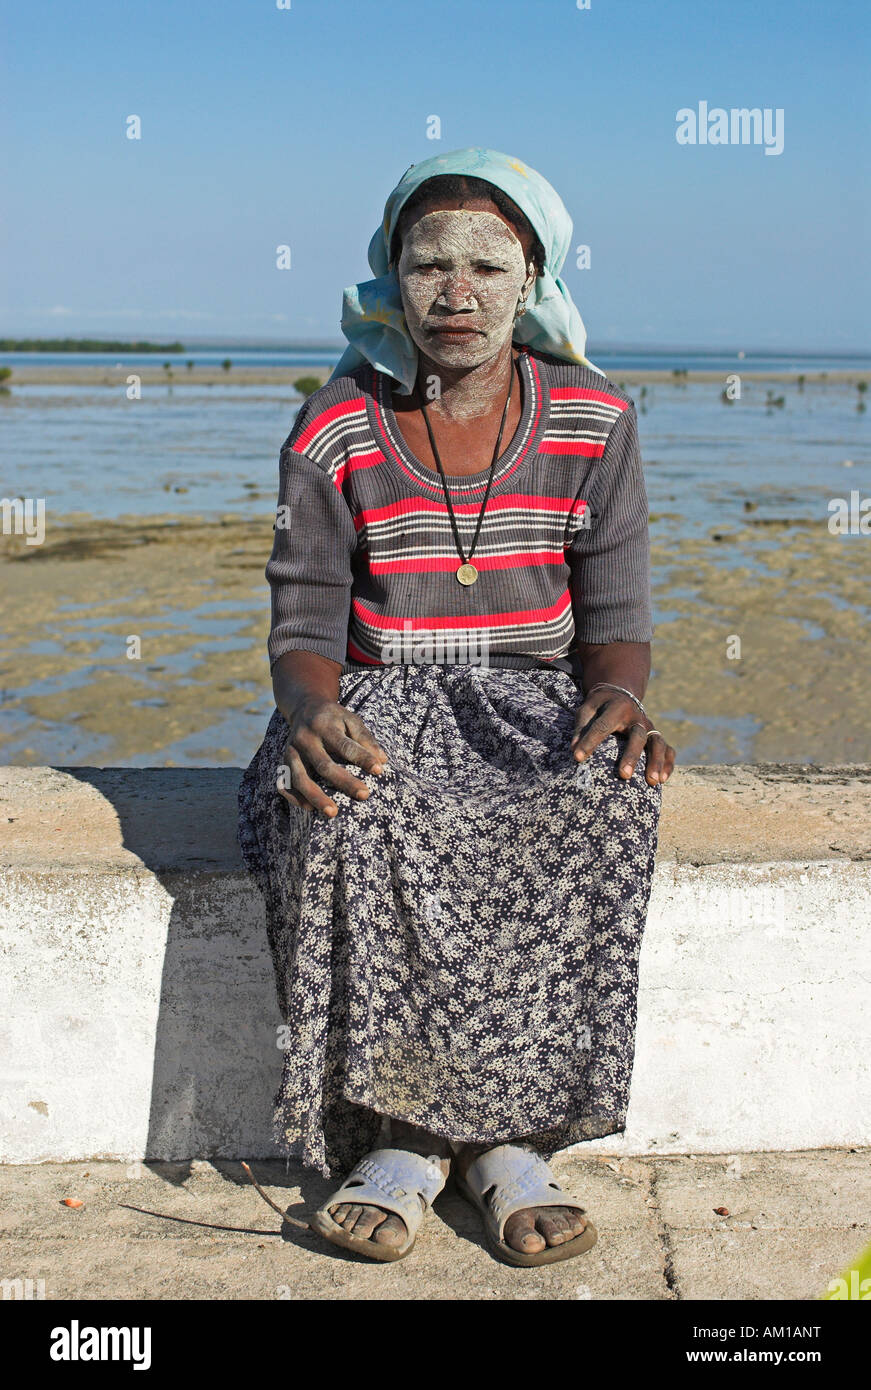 Woman with traditional facial mask, Ibo Island, Quirimbas islands, Mozambique, Africa Stock Photo